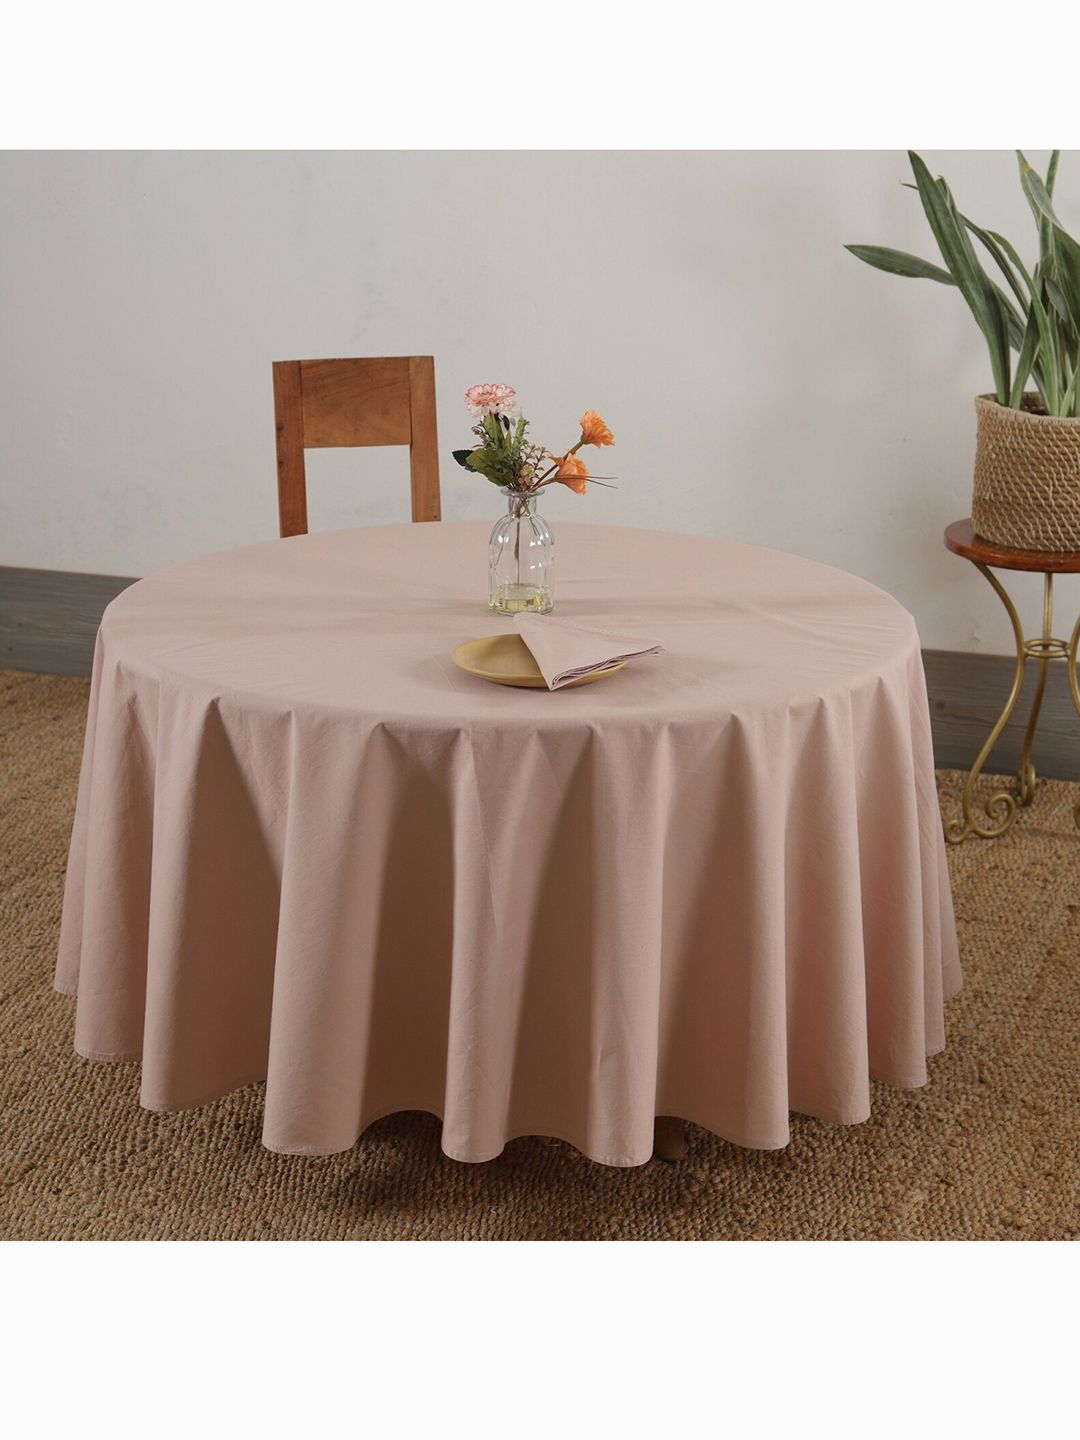 HANDICRAFT PALACE Rose Gold Solid 6-Seater Round Cotton Table Cover With Napkin Set Price in India